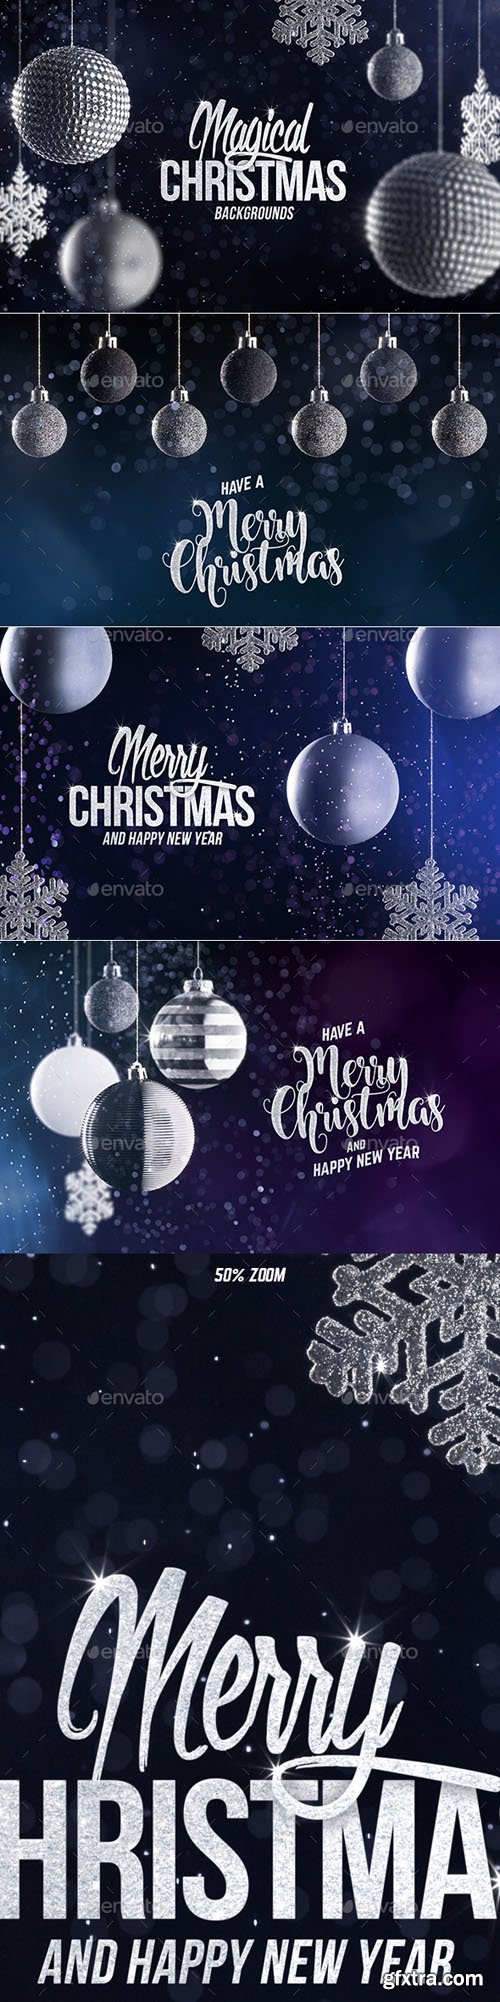 GR - 4 Christmas Backgrounds with Editable Text 21003151